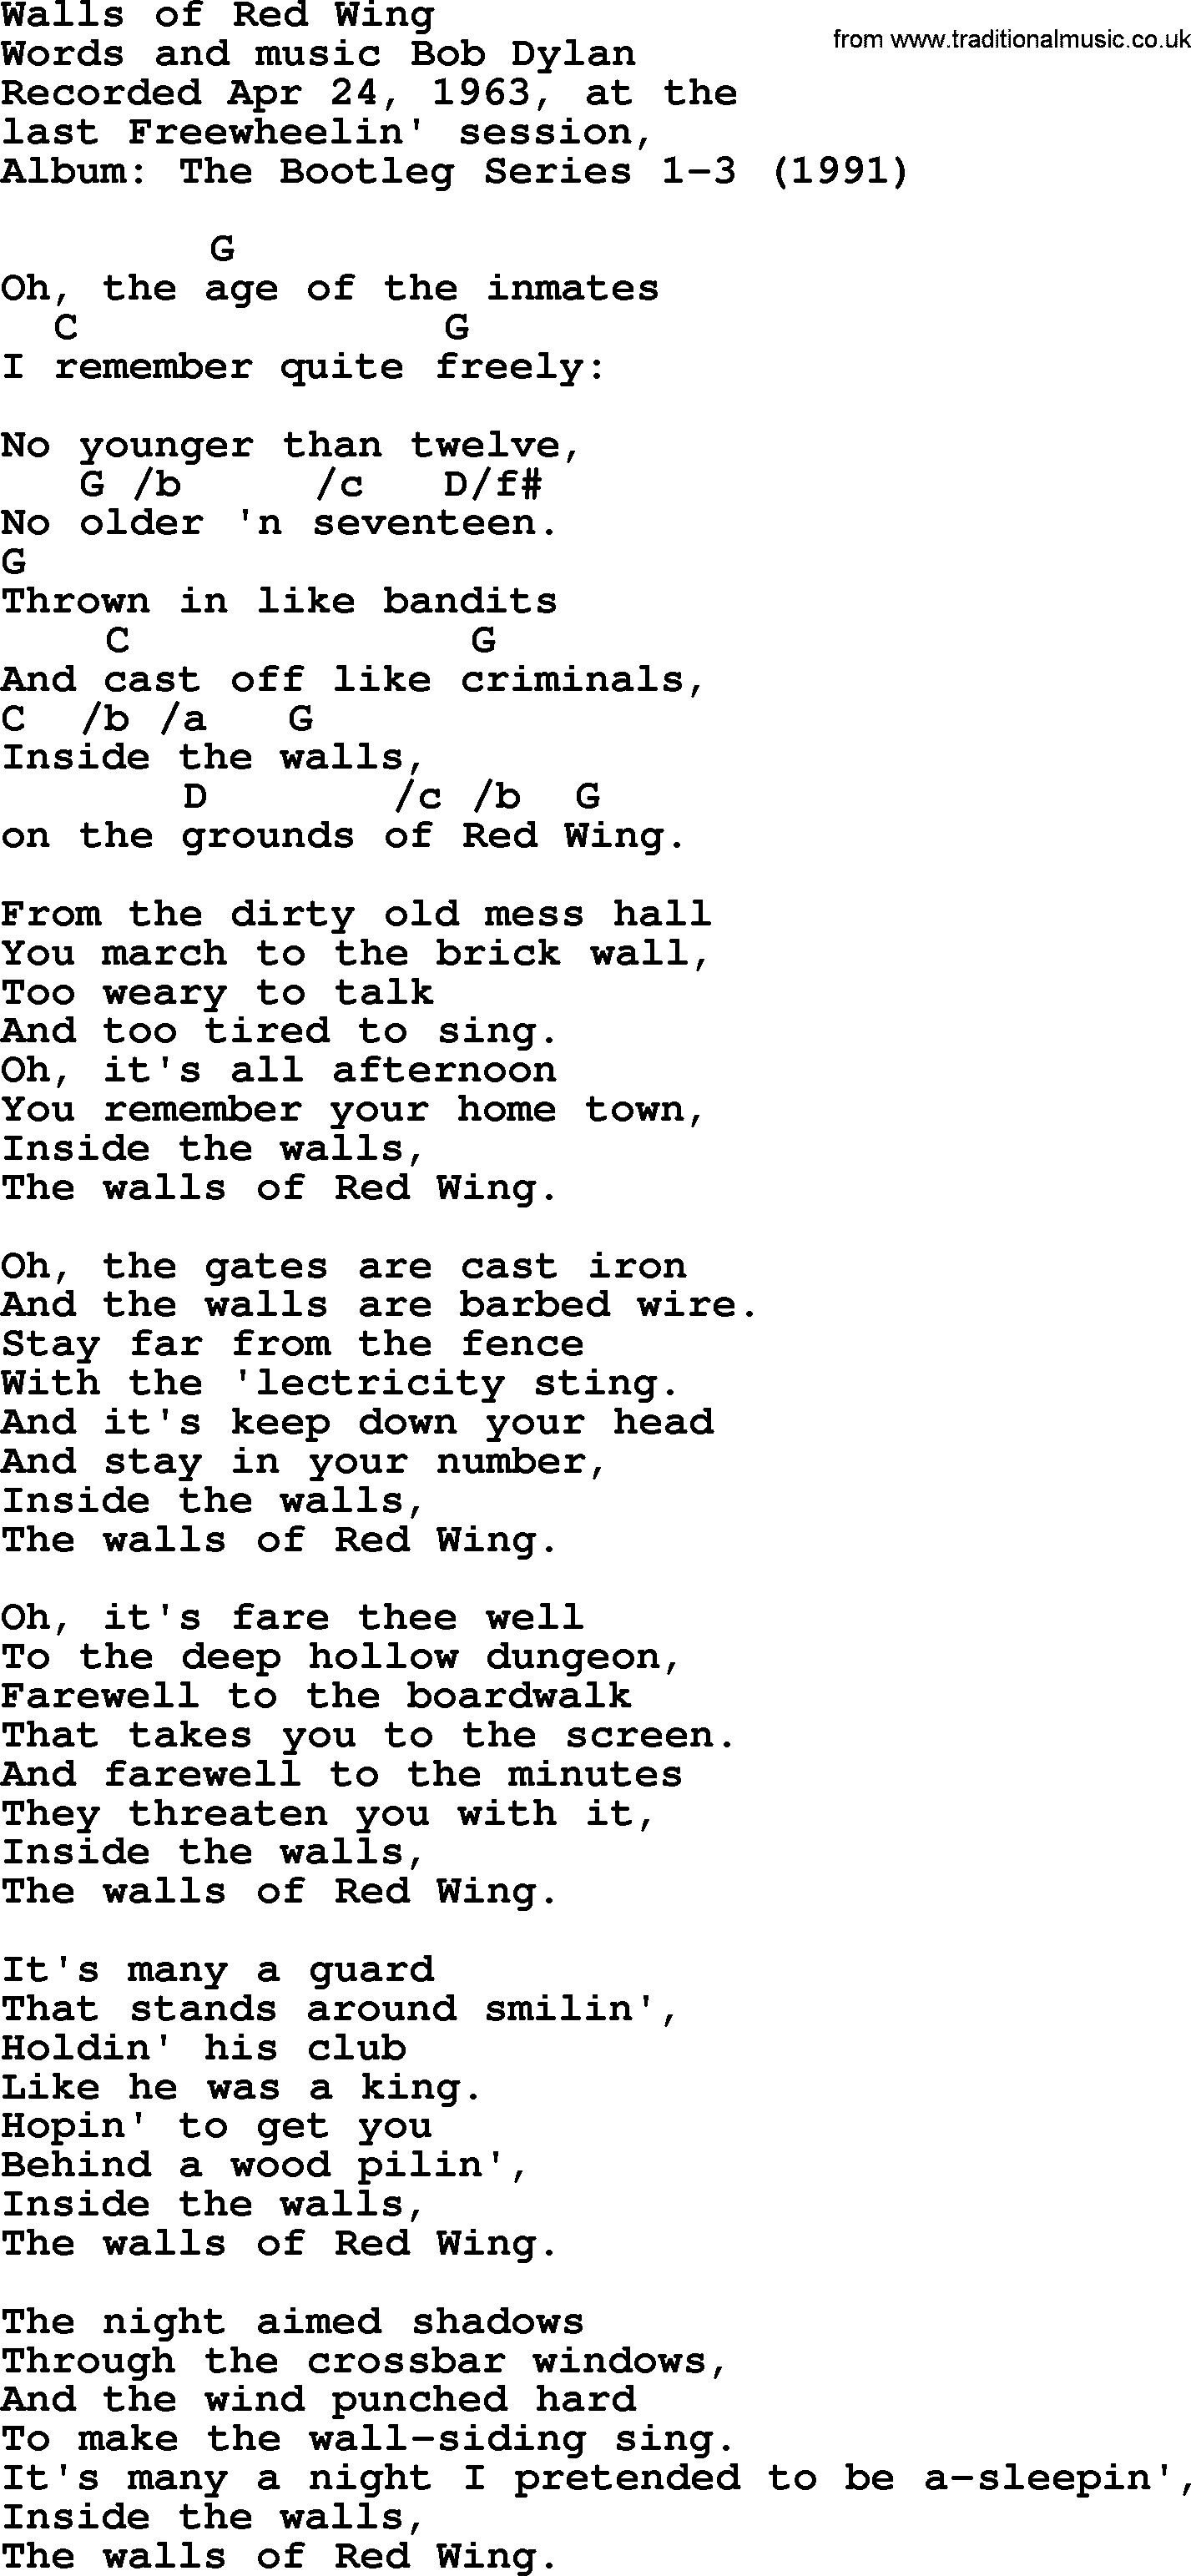 Bob Dylan song, lyrics with chords - Walls of Red Wing